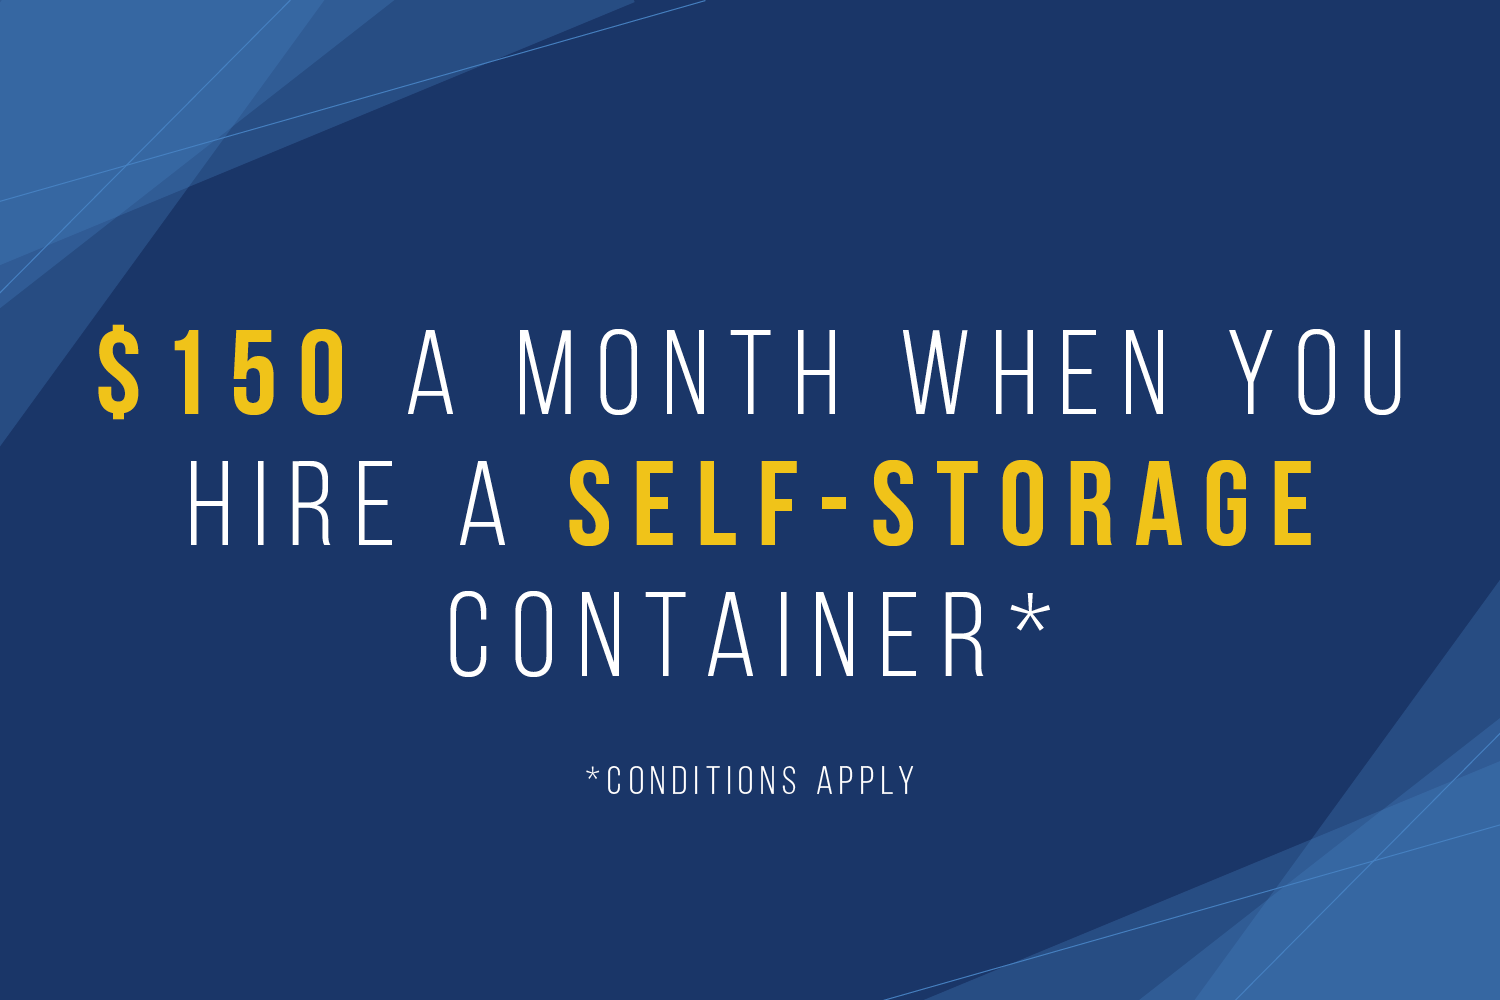 $150 a month when you hire a Self-Storage container. Conditions apply.